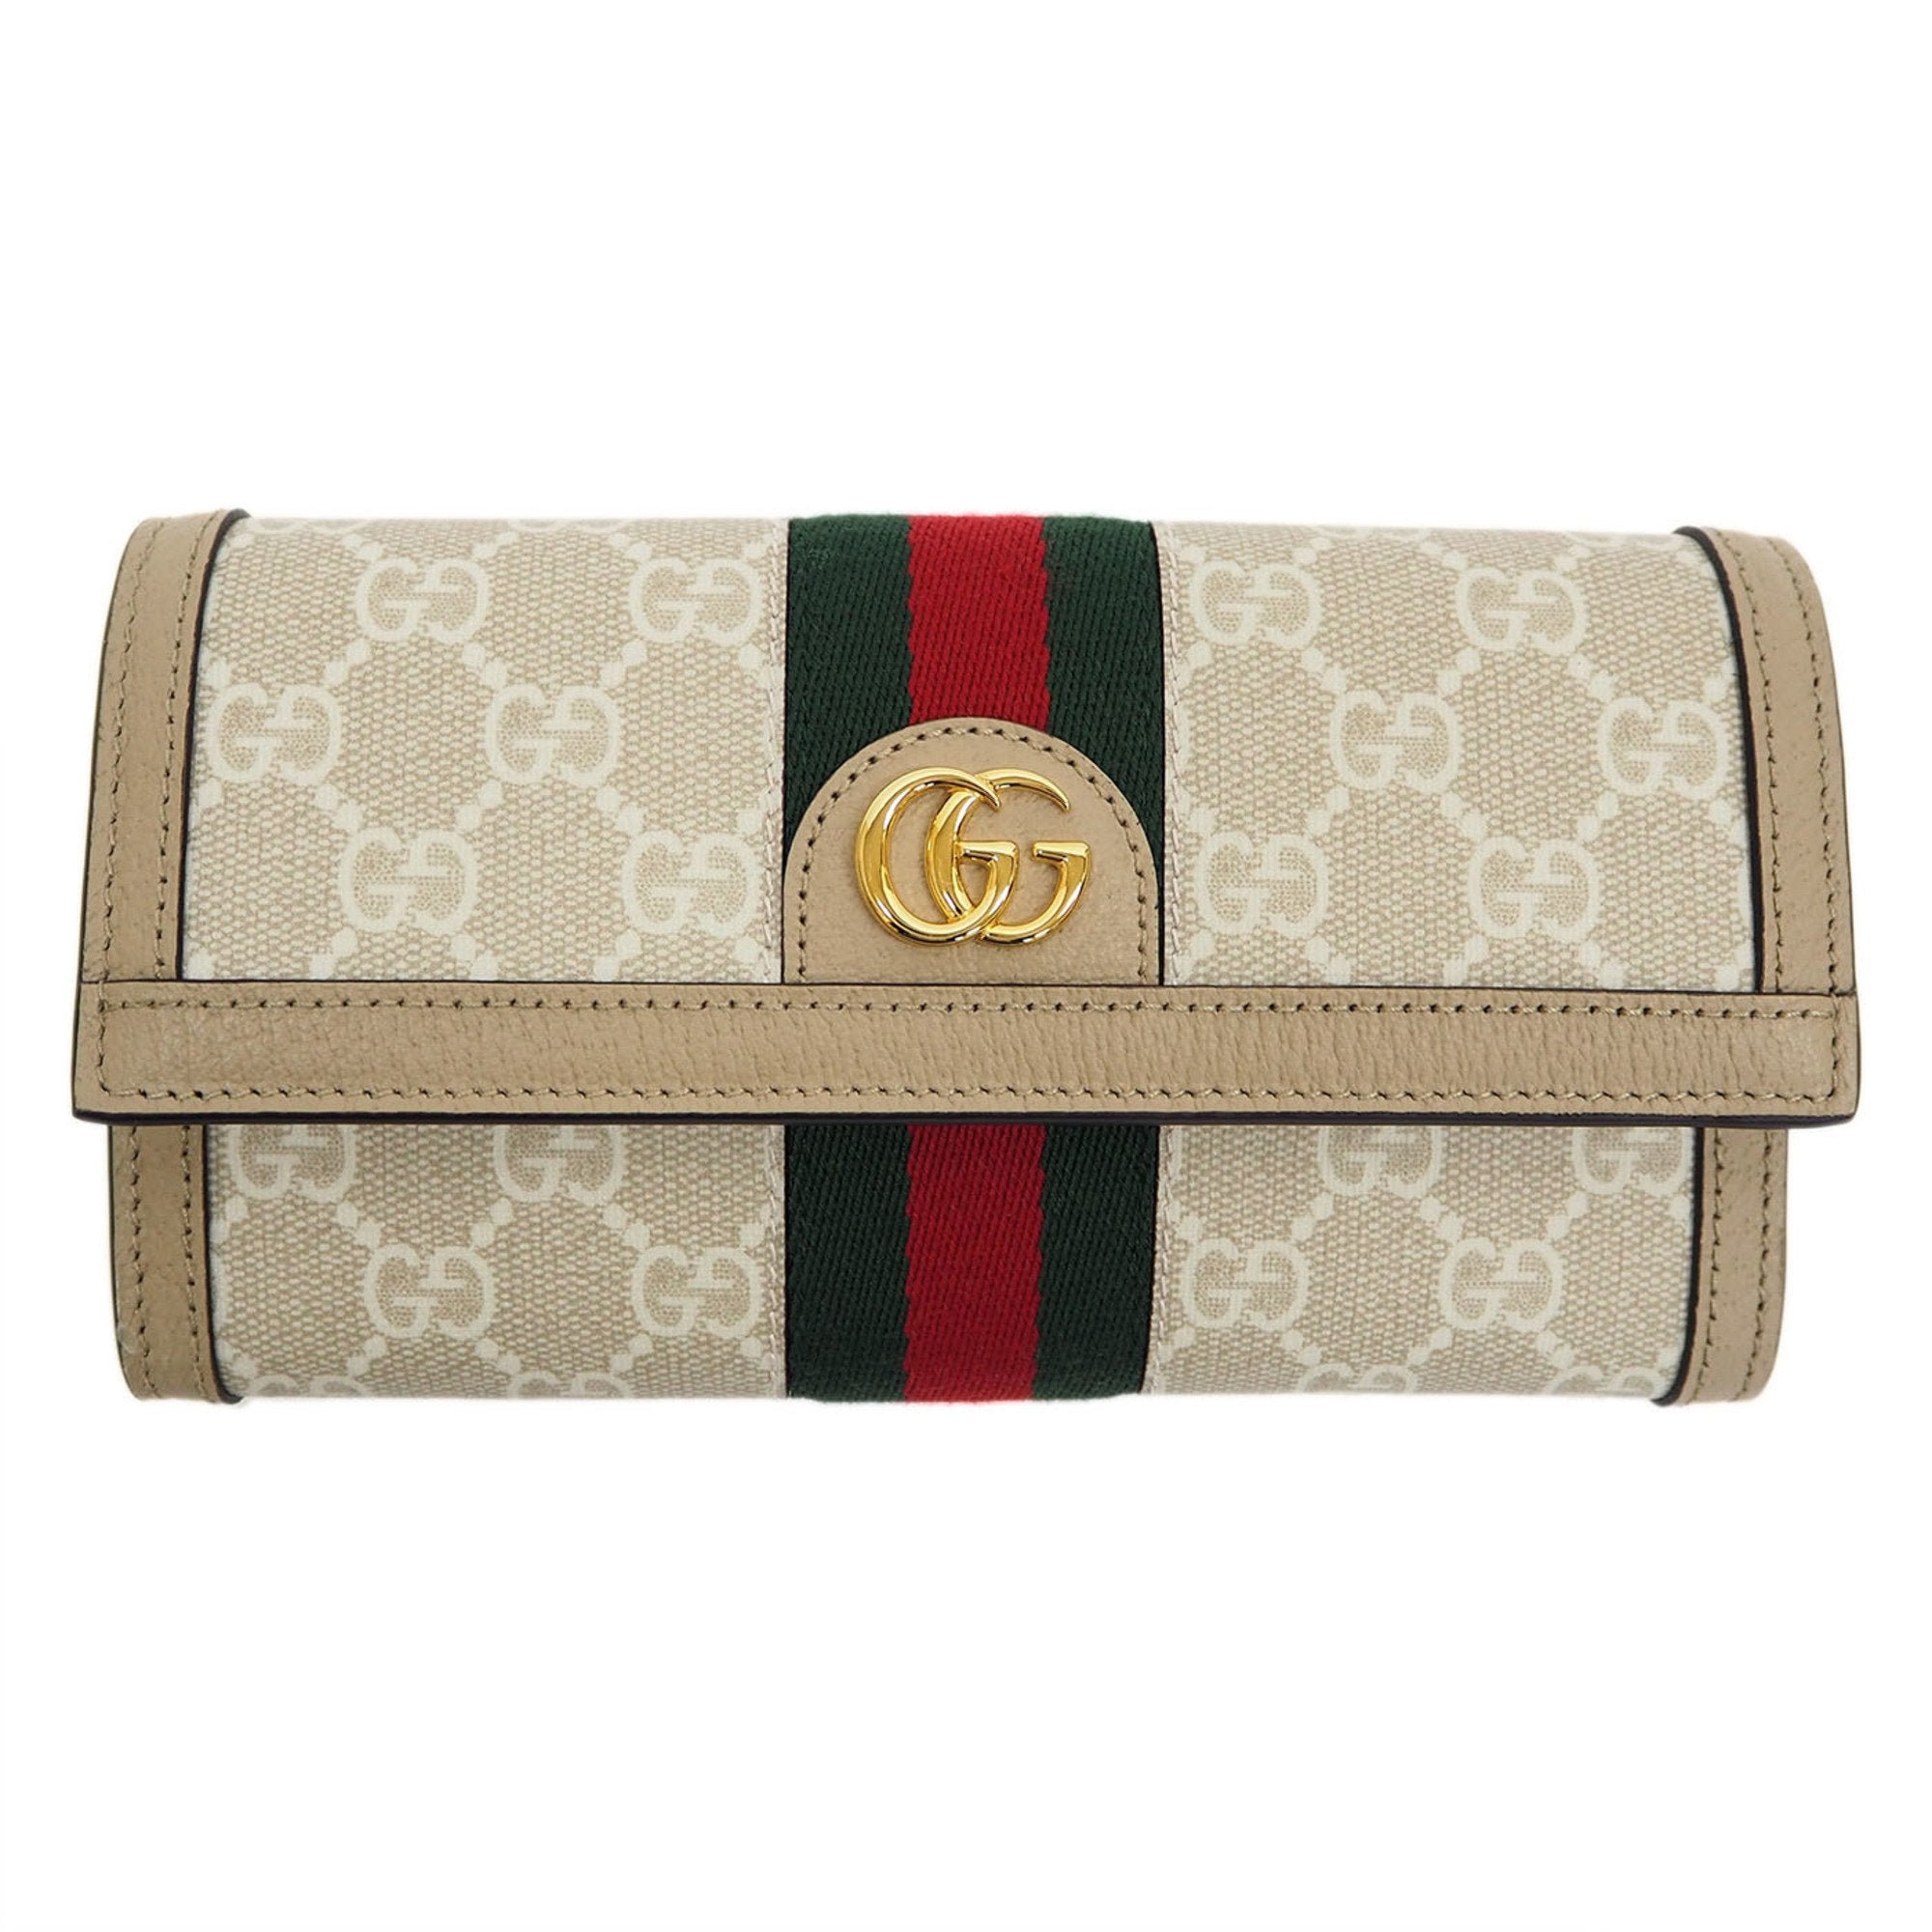 Vintage Gucci Wallet brand new never used gucci... - Depop